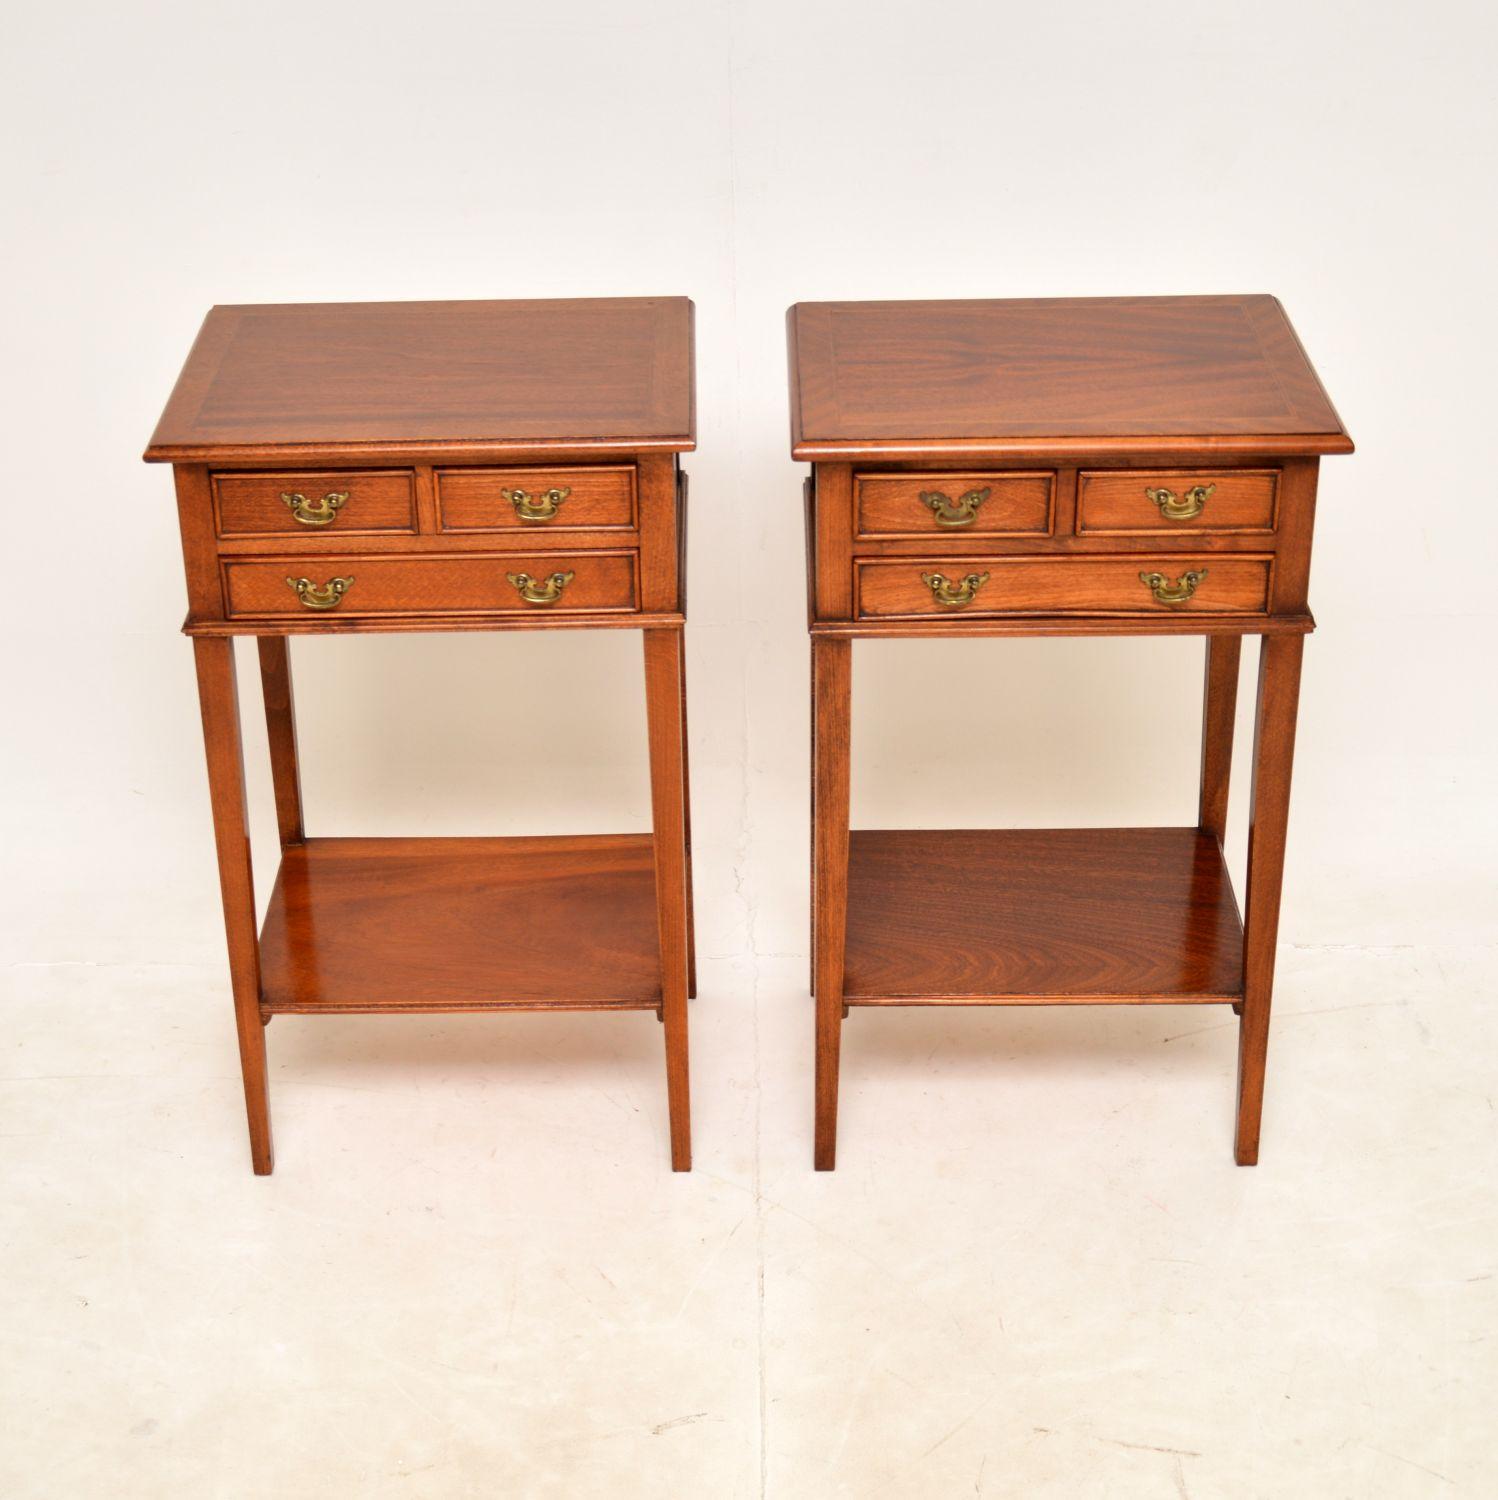 A smart and very well made pair of antique Georgian style side tables. They were made in England, they date from around the 1960’s.

The quality is excellent, they are made from a combination of woods. The tops are cross banded, the drawers have